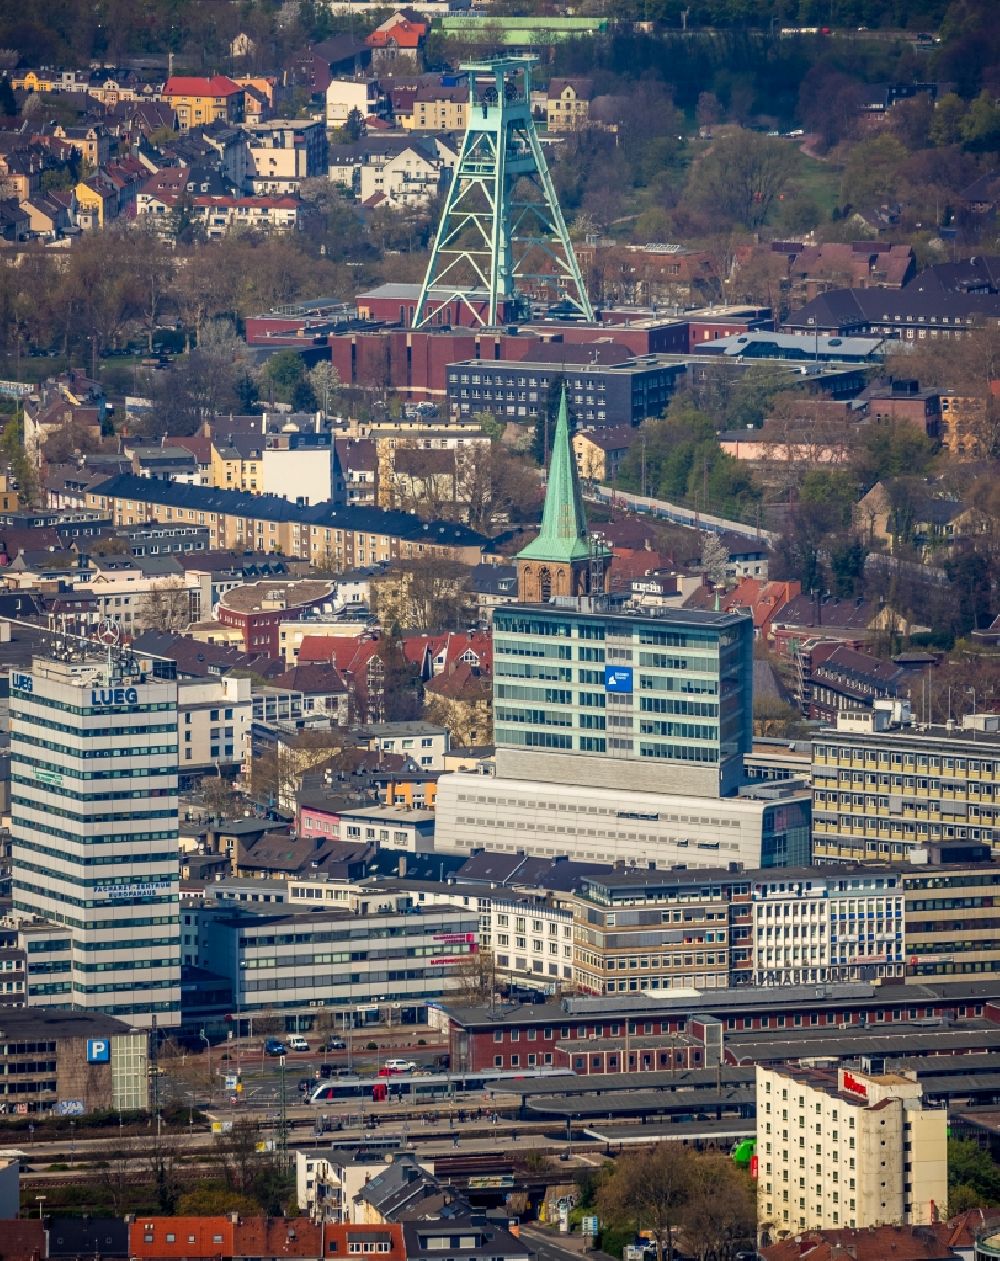 Aerial image Bochum - The city center in the downtown area in the district Innenstadt in Bochum in the state North Rhine-Westphalia, Germany